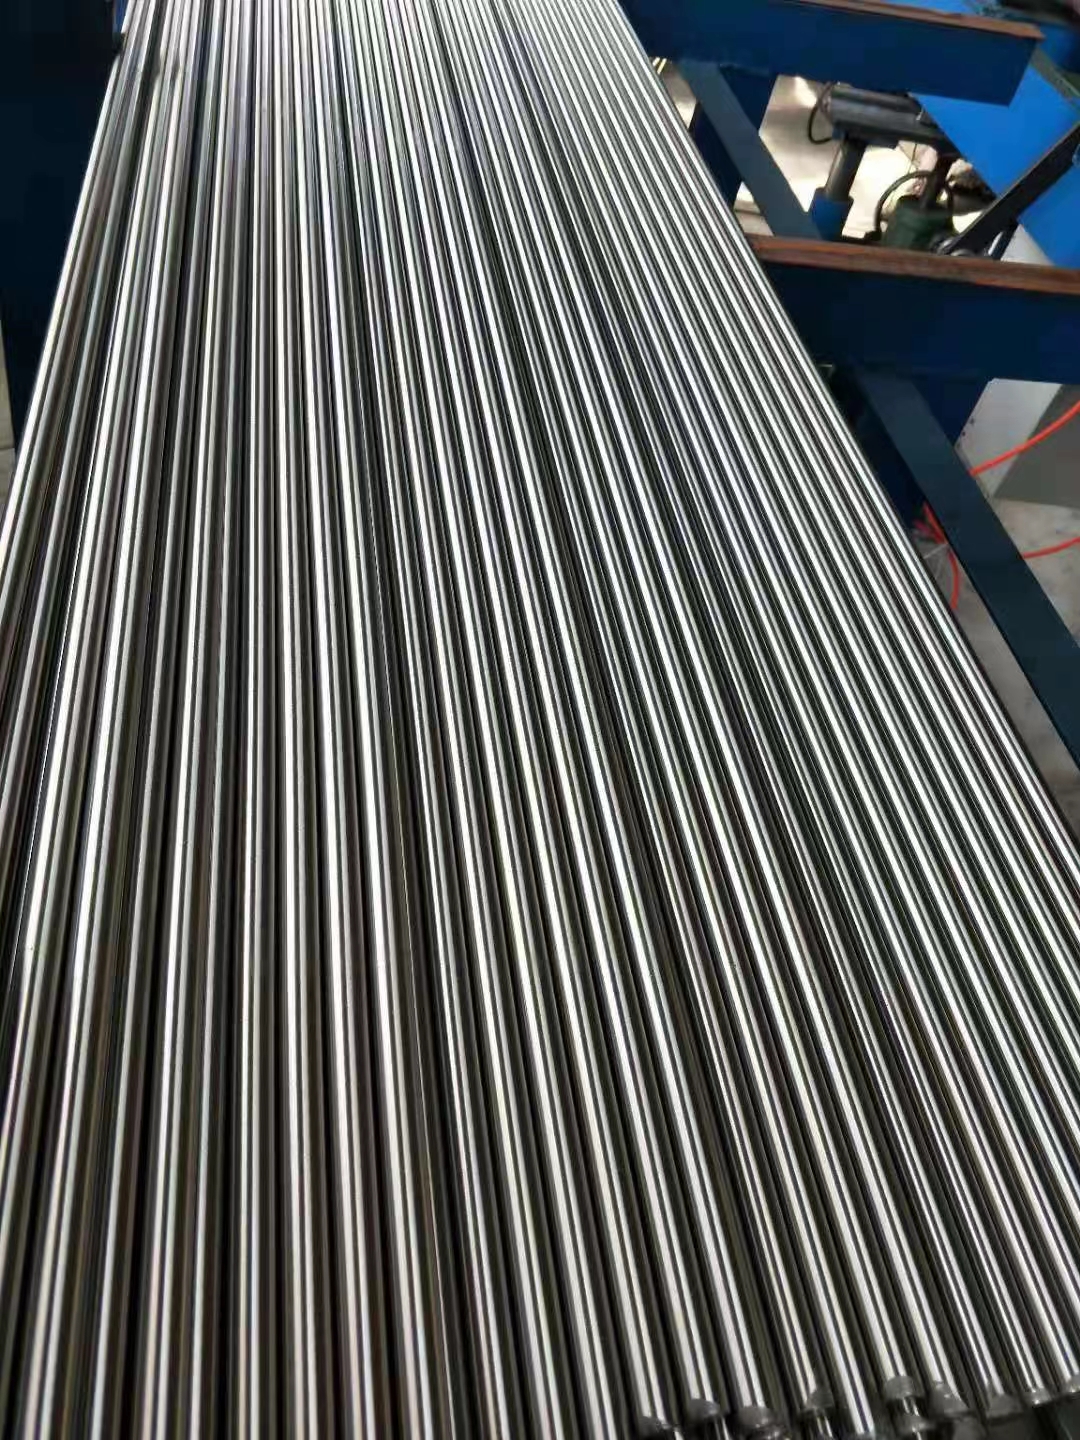 303 Stainless Steel Bar - Hexes, Rounds, Squares 303 SS Bar